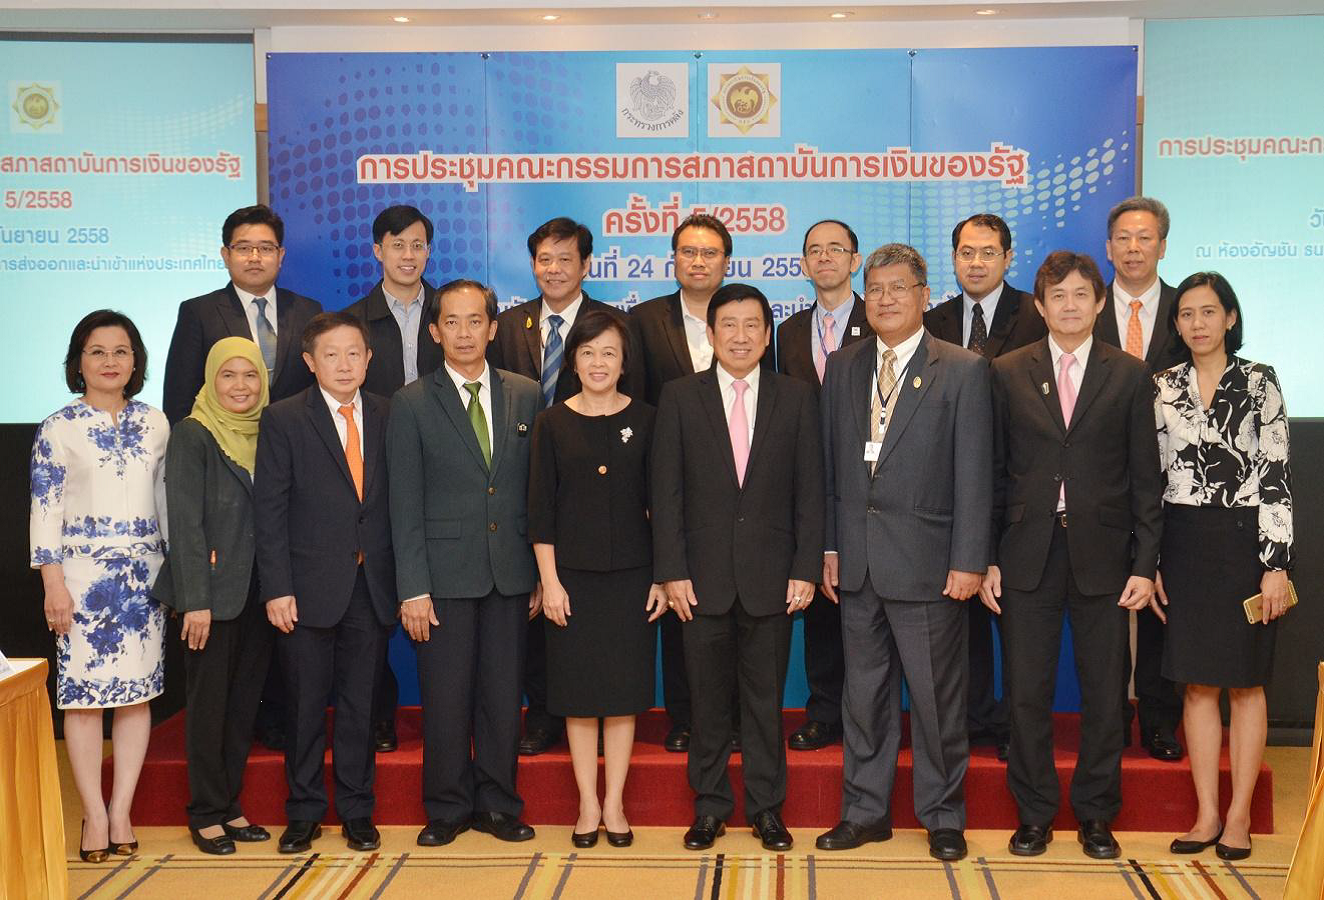 EXIM Thailand Hosts Council of Specialized Financial Institutions Meeting